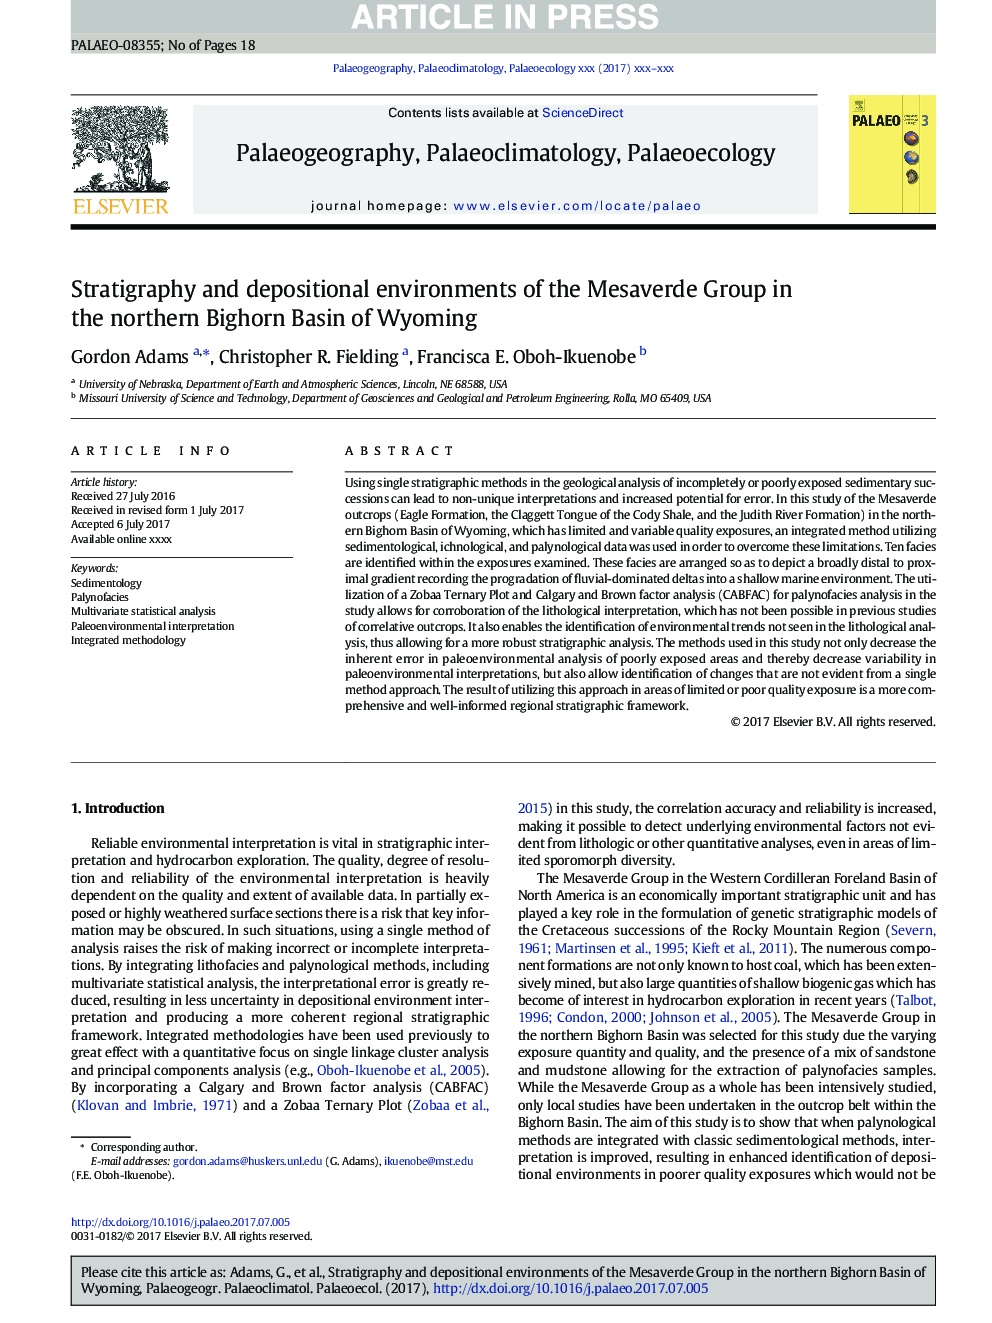 Stratigraphy and depositional environments of the Mesaverde Group in the northern Bighorn Basin of Wyoming